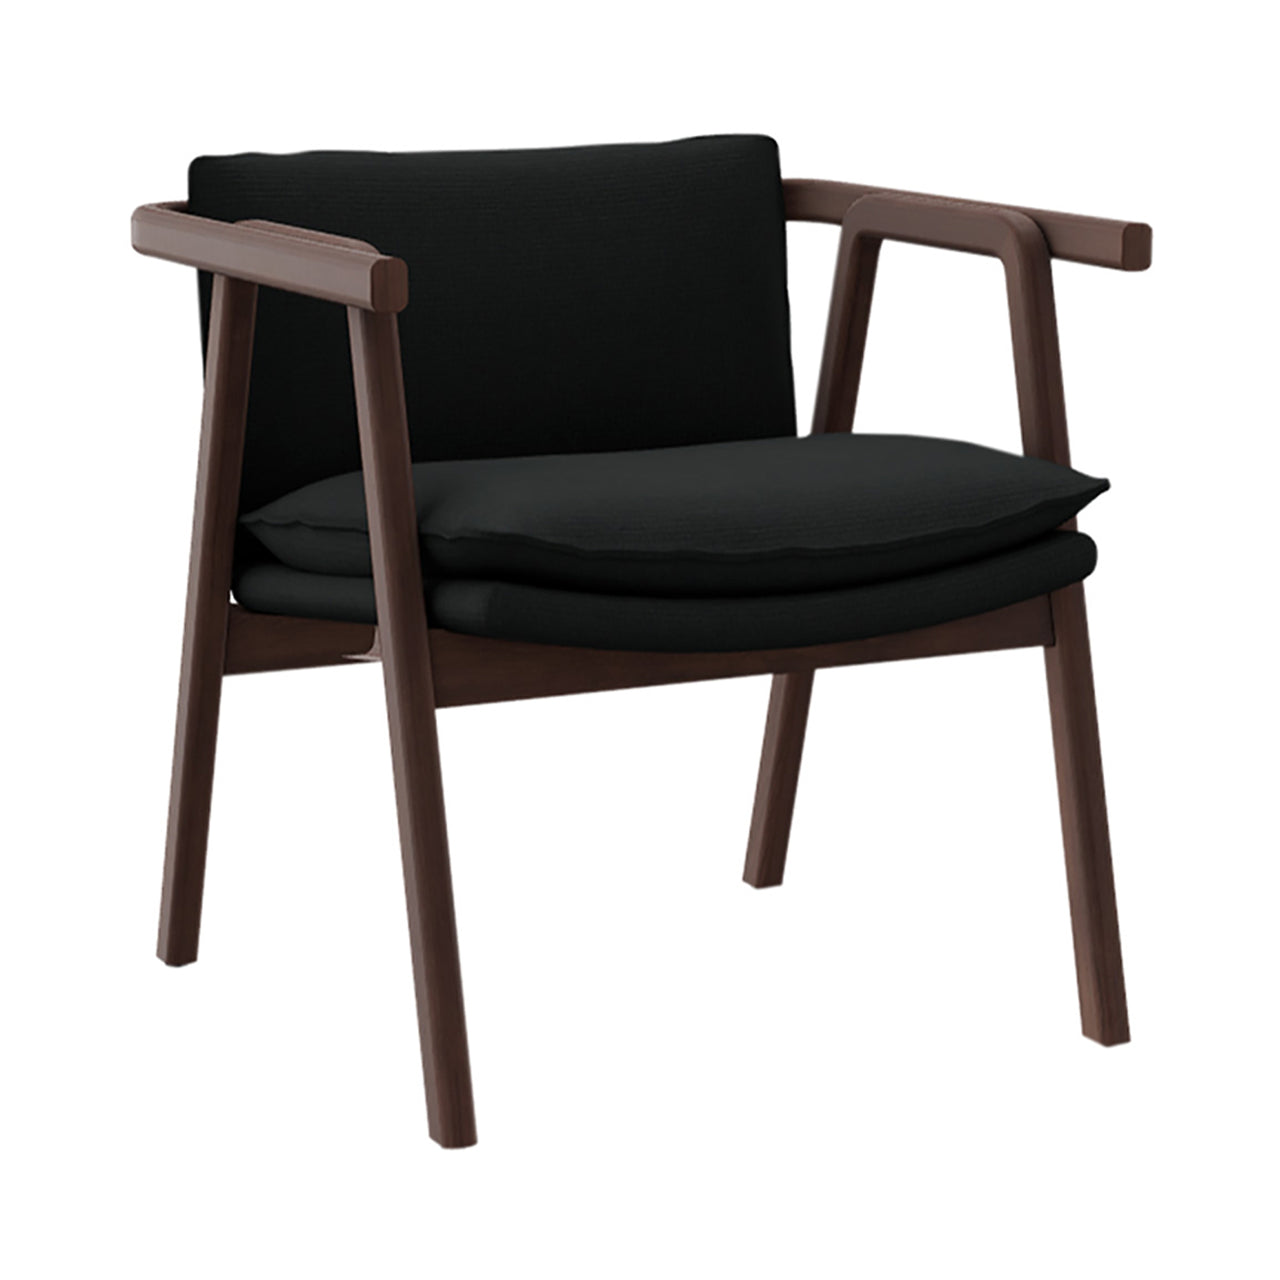 Pick Up Sticks Armchair: Umber Stained Oak